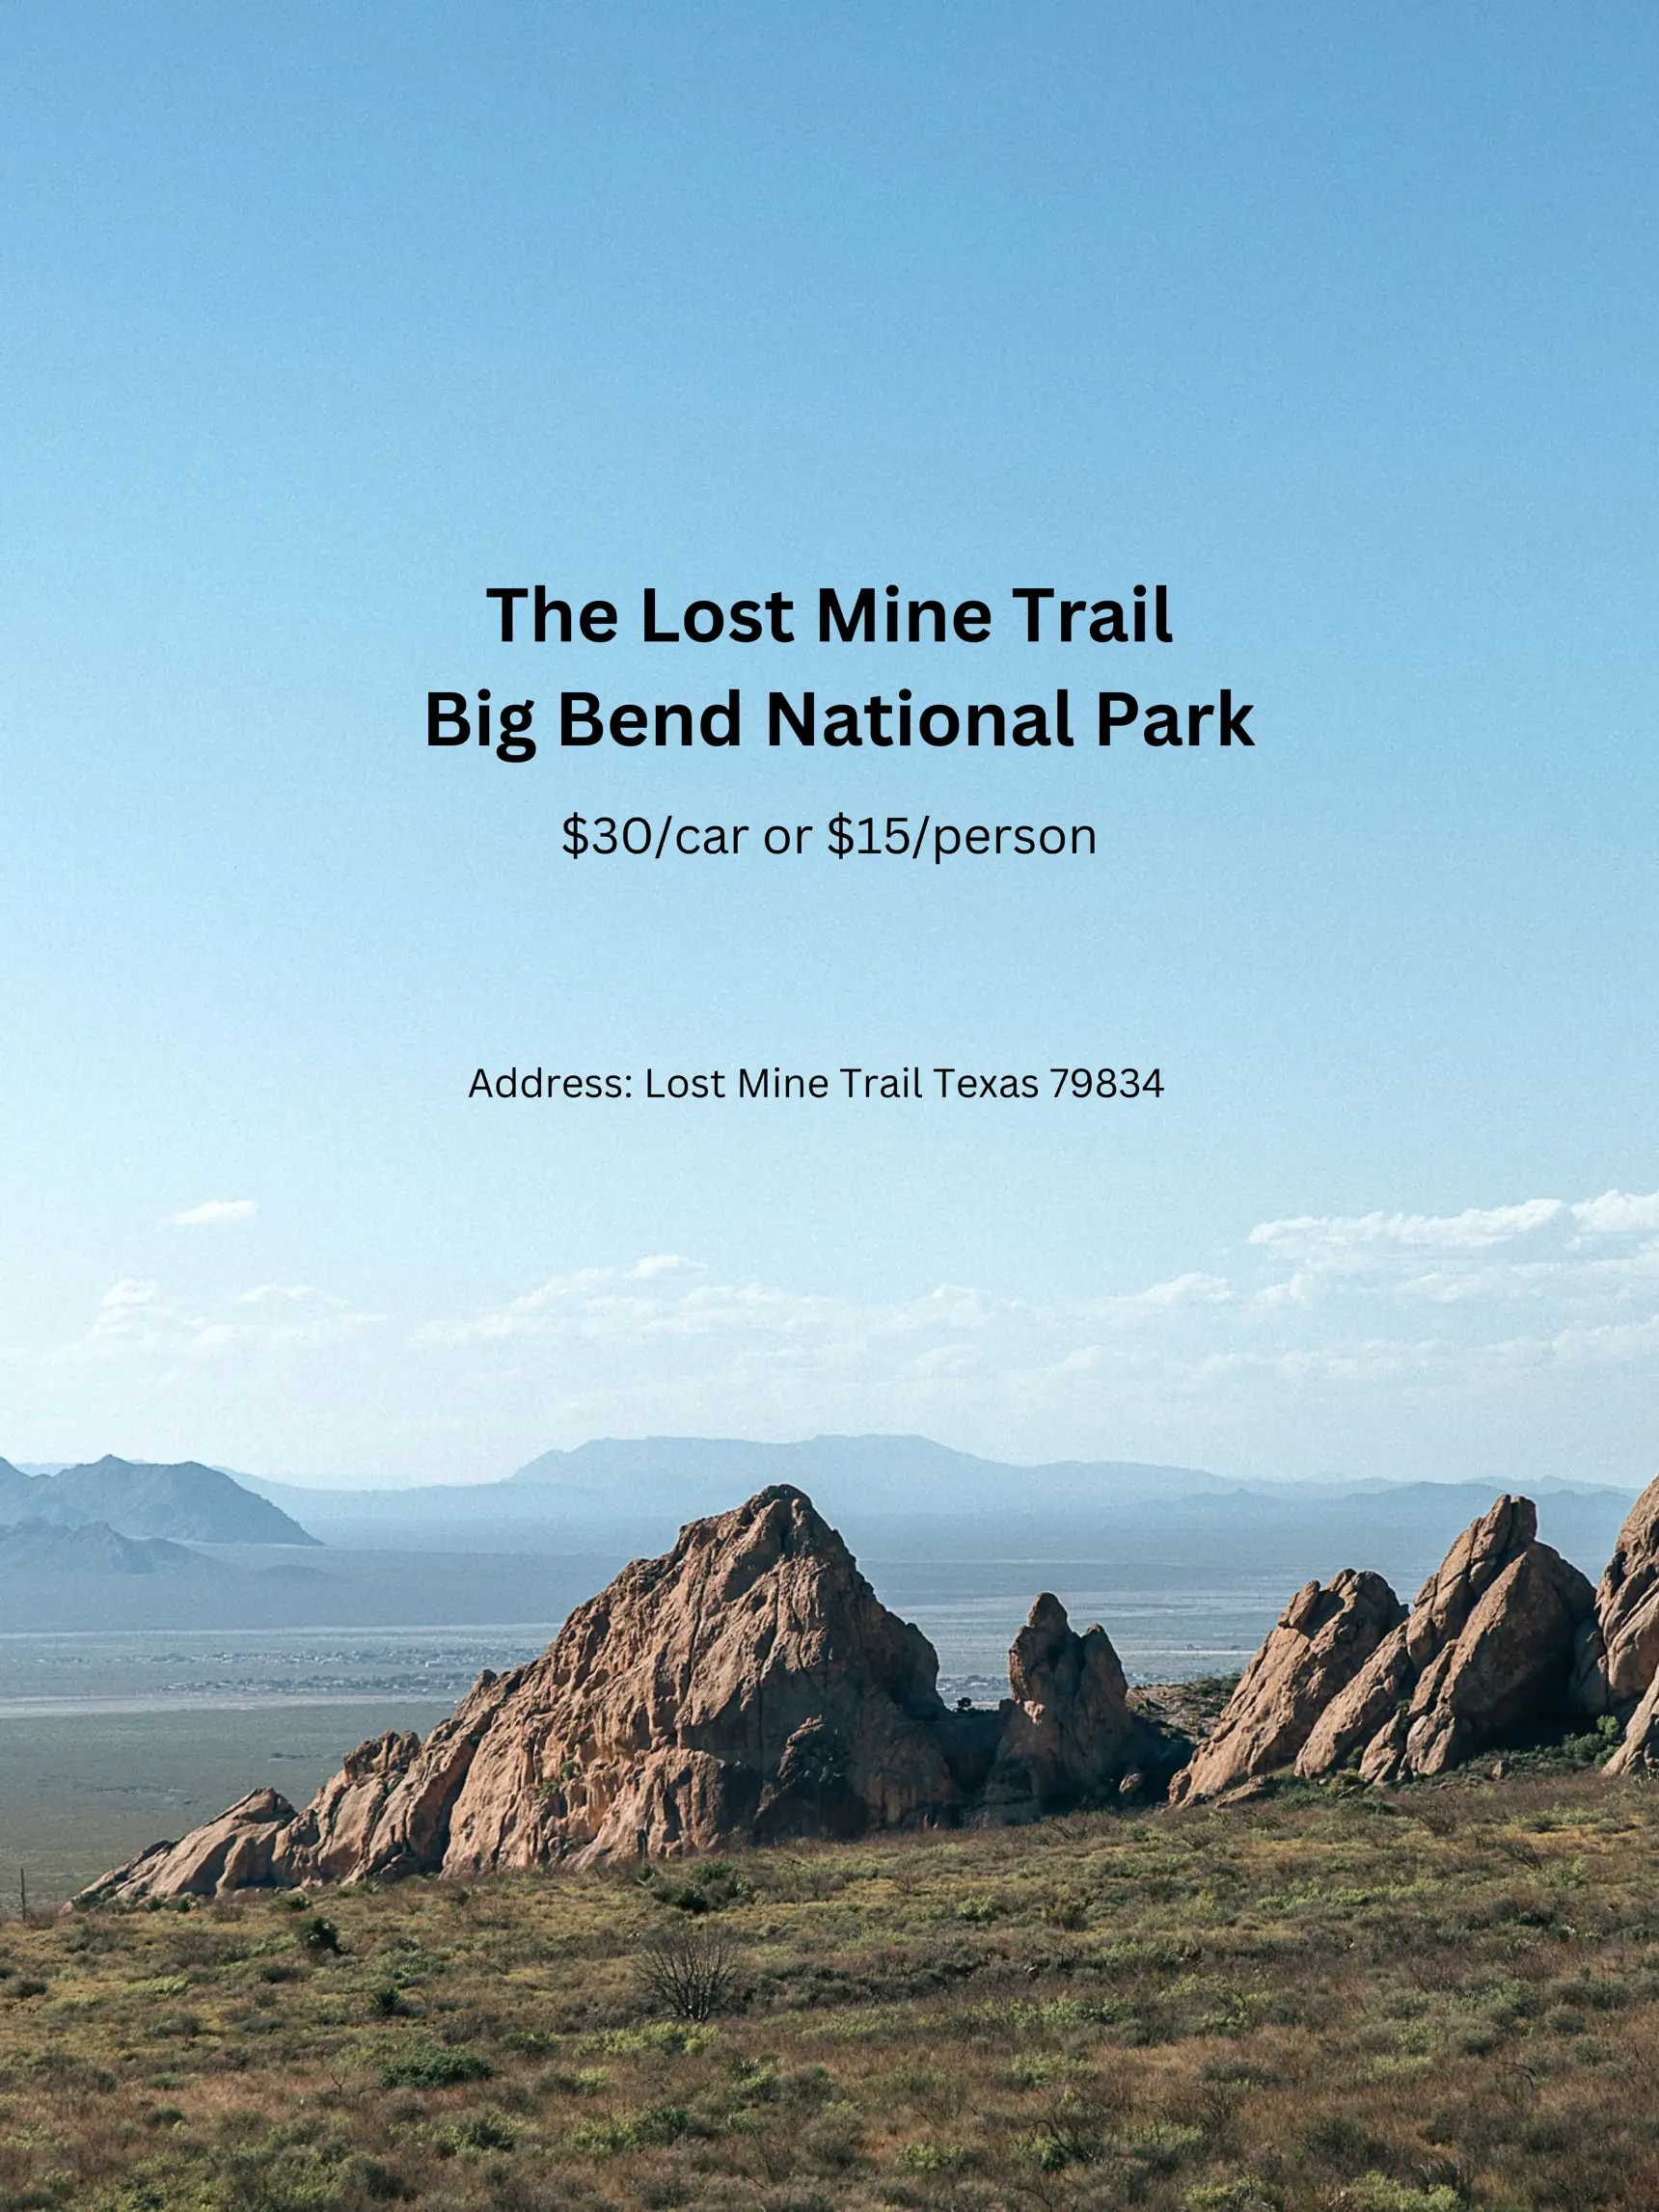  A trail with a price of $30/car or $15/person.